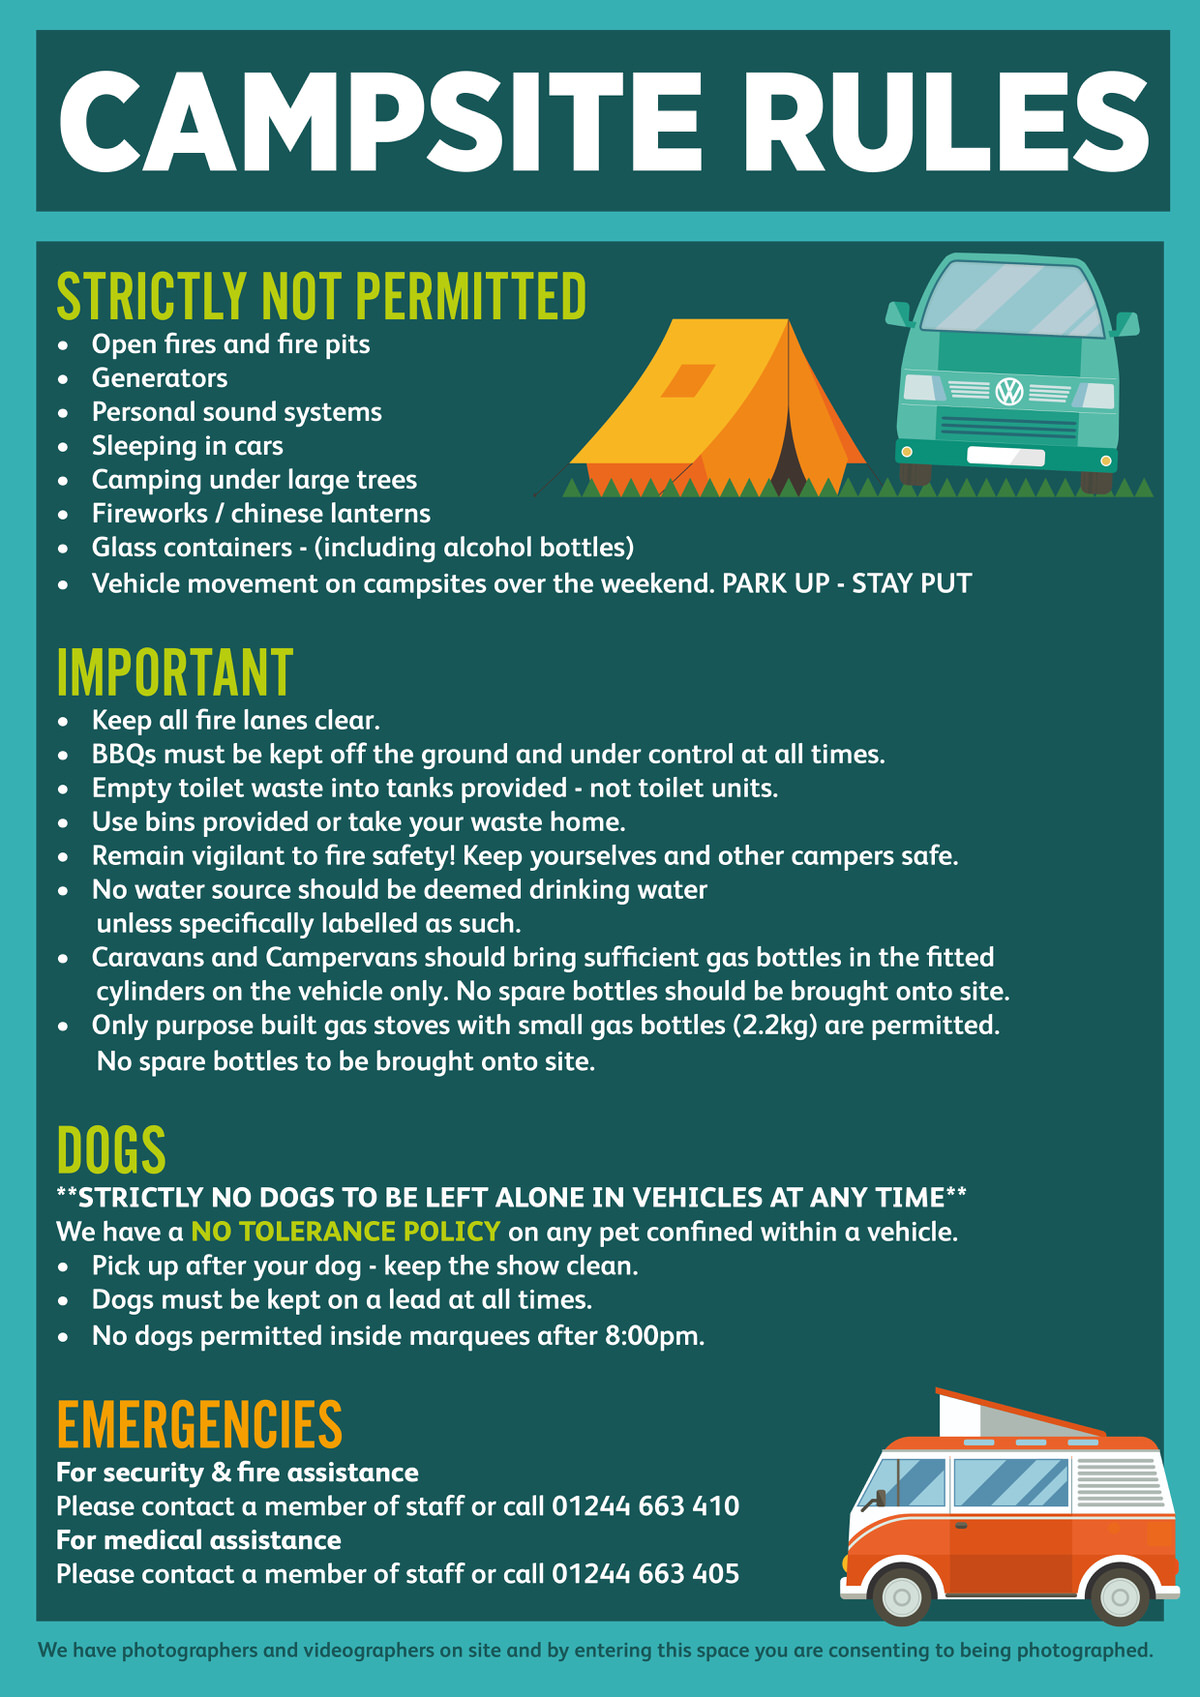 Camping rules. Campsite Rules правила. Campsite Rules 10 правил. Campsite Rules на английском.